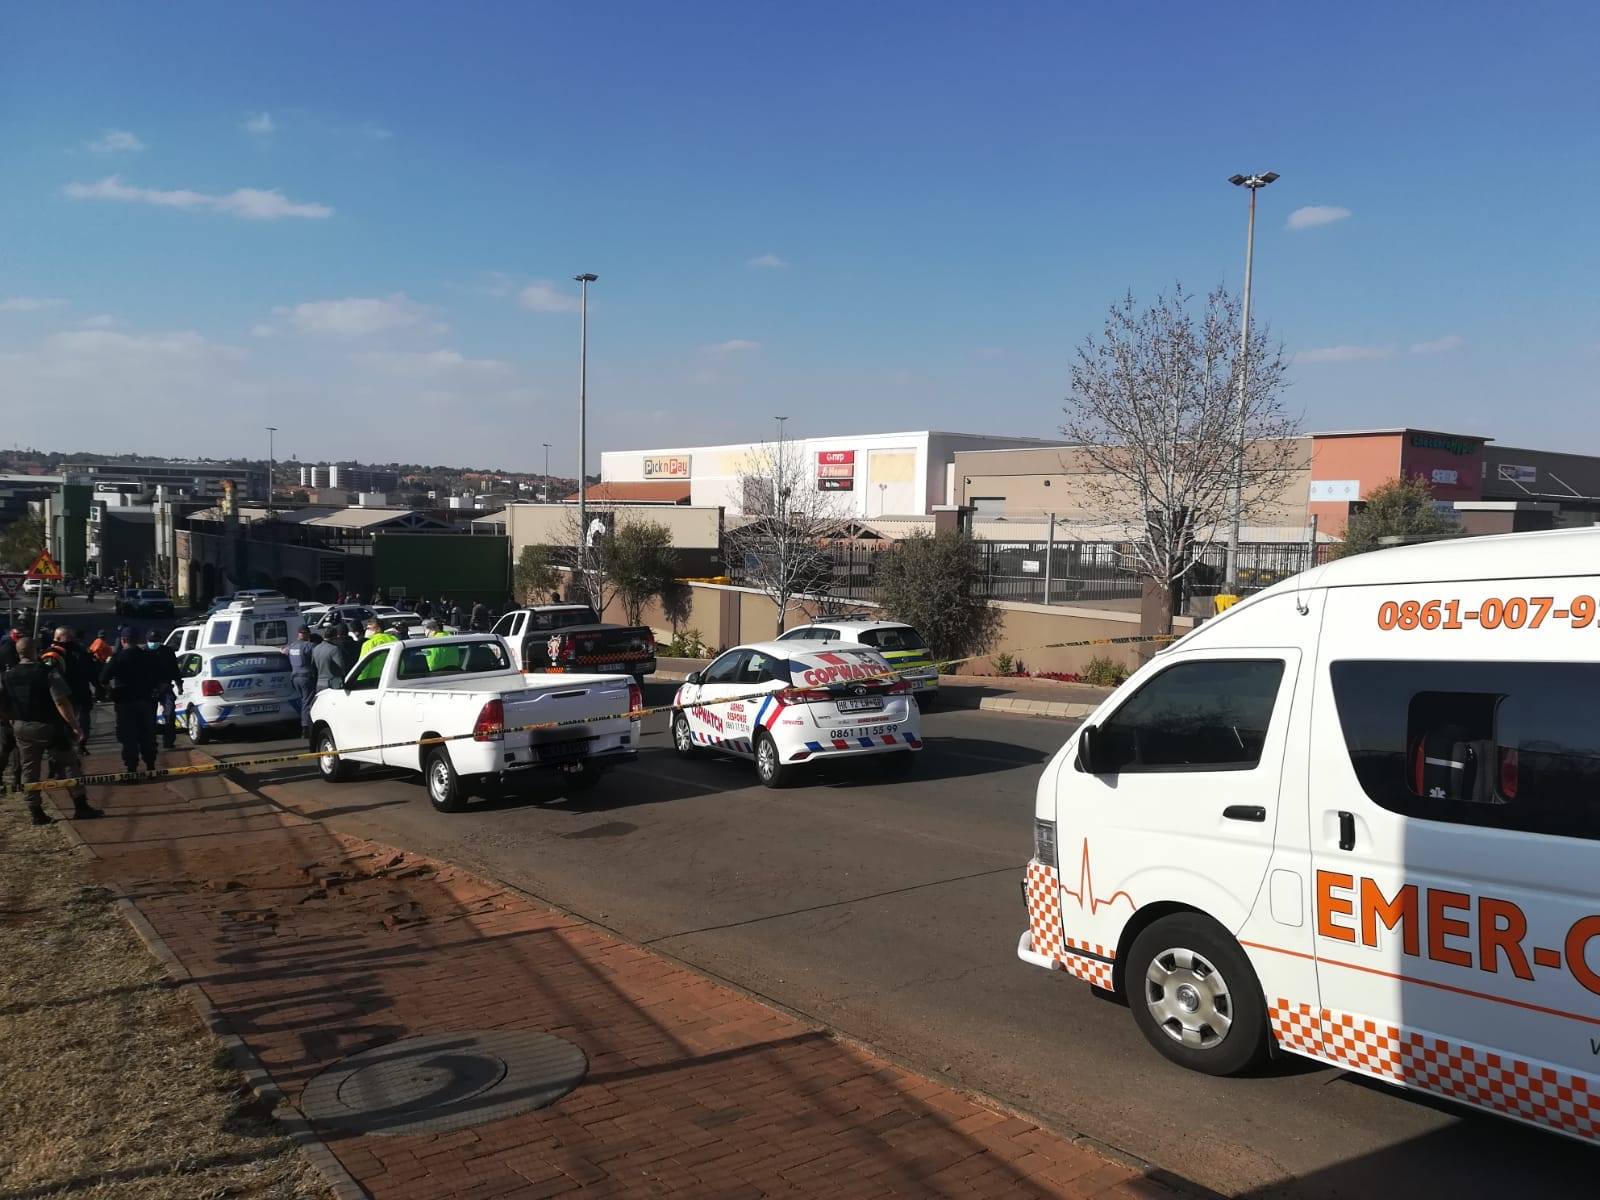 One seriously injured in a shoot out at a mall in Centurion